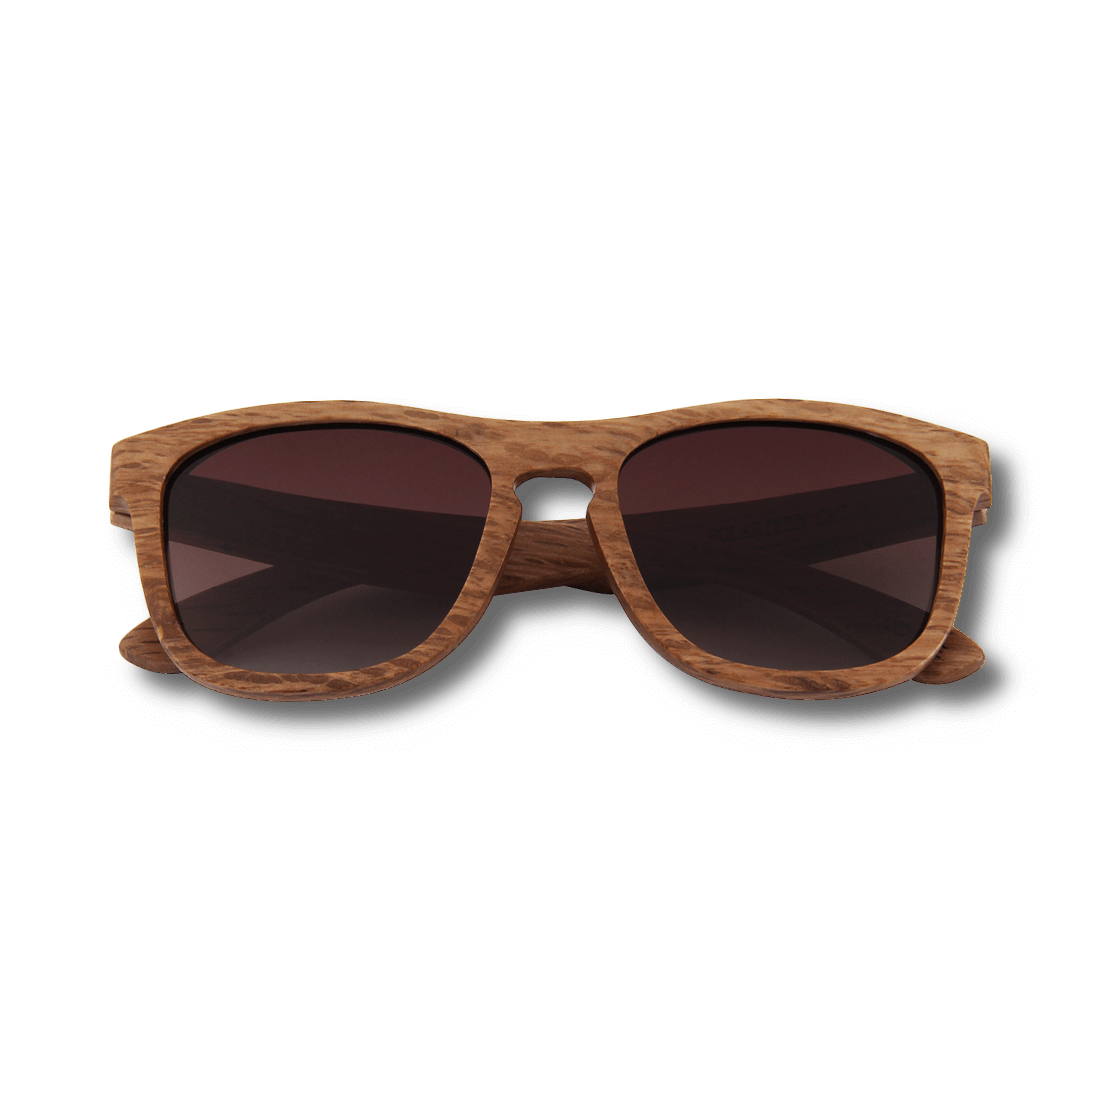 Real Zebra All Wood Jacks by WUDN, Sunglasses - WUDN